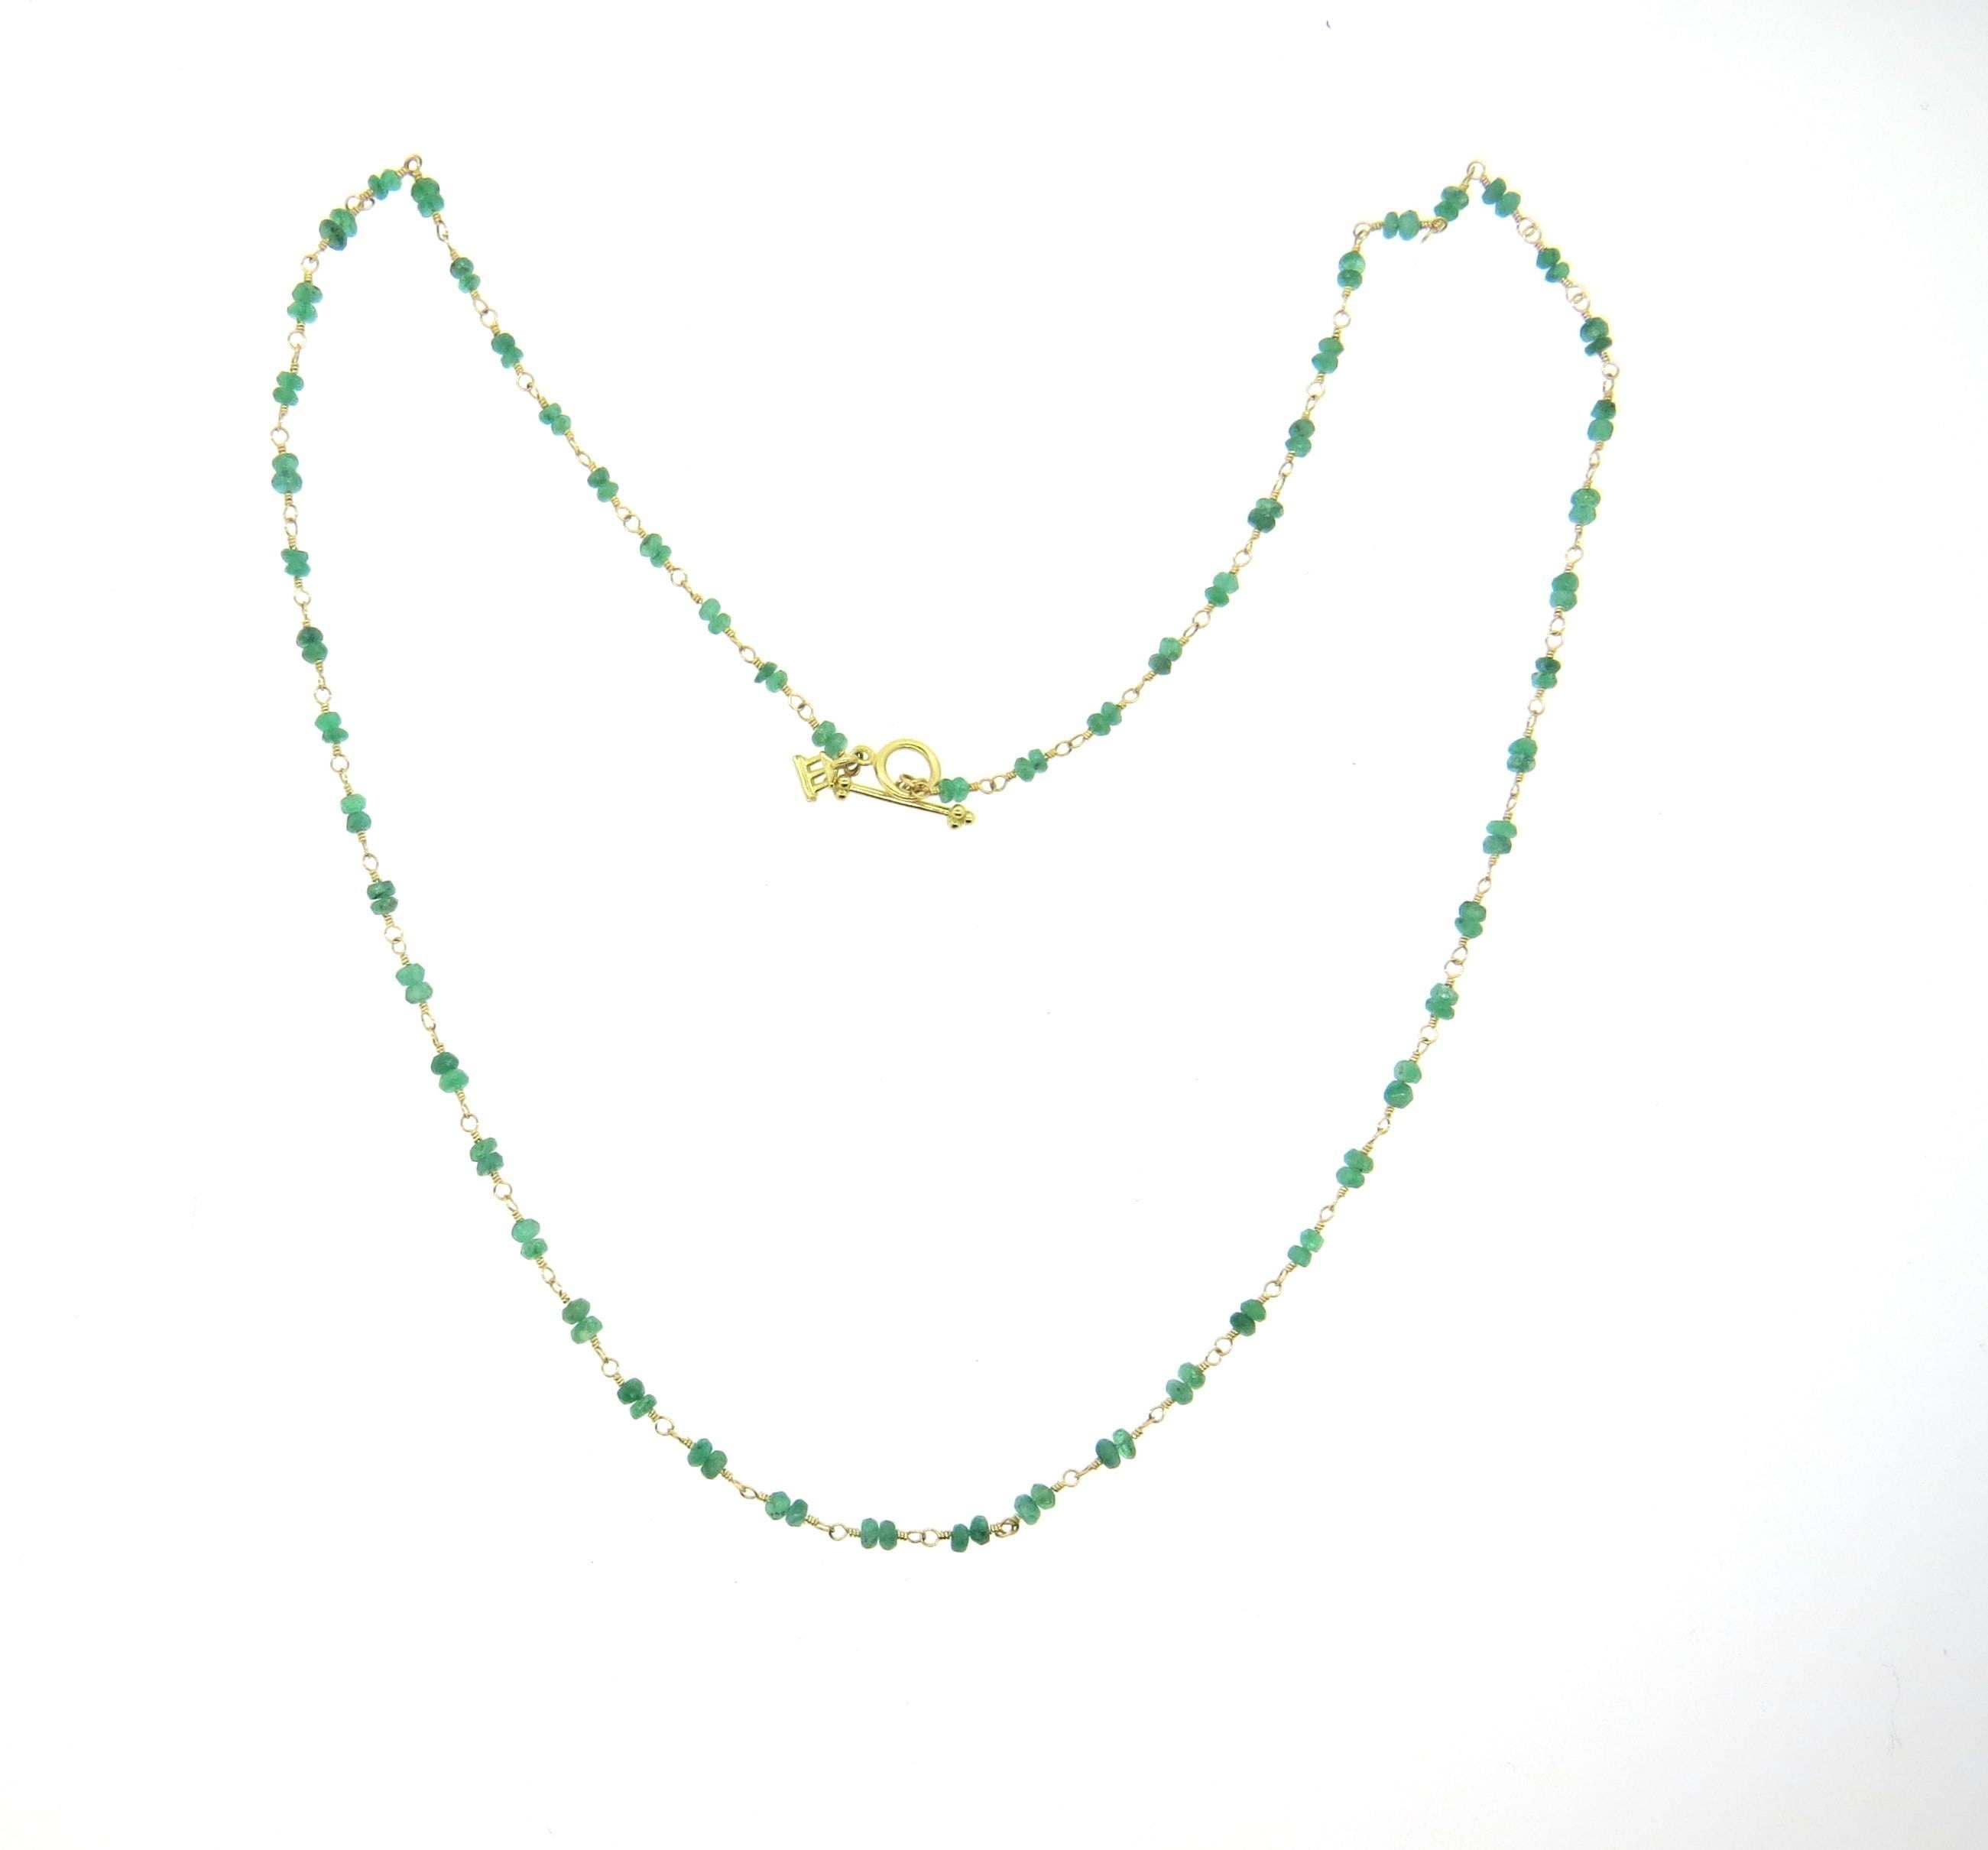 New 18k yellow gold necklace, with toggle closure, crafted by Temple St. Clair for Karina collection, featuring 3mm emerald beads. Necklace is 24